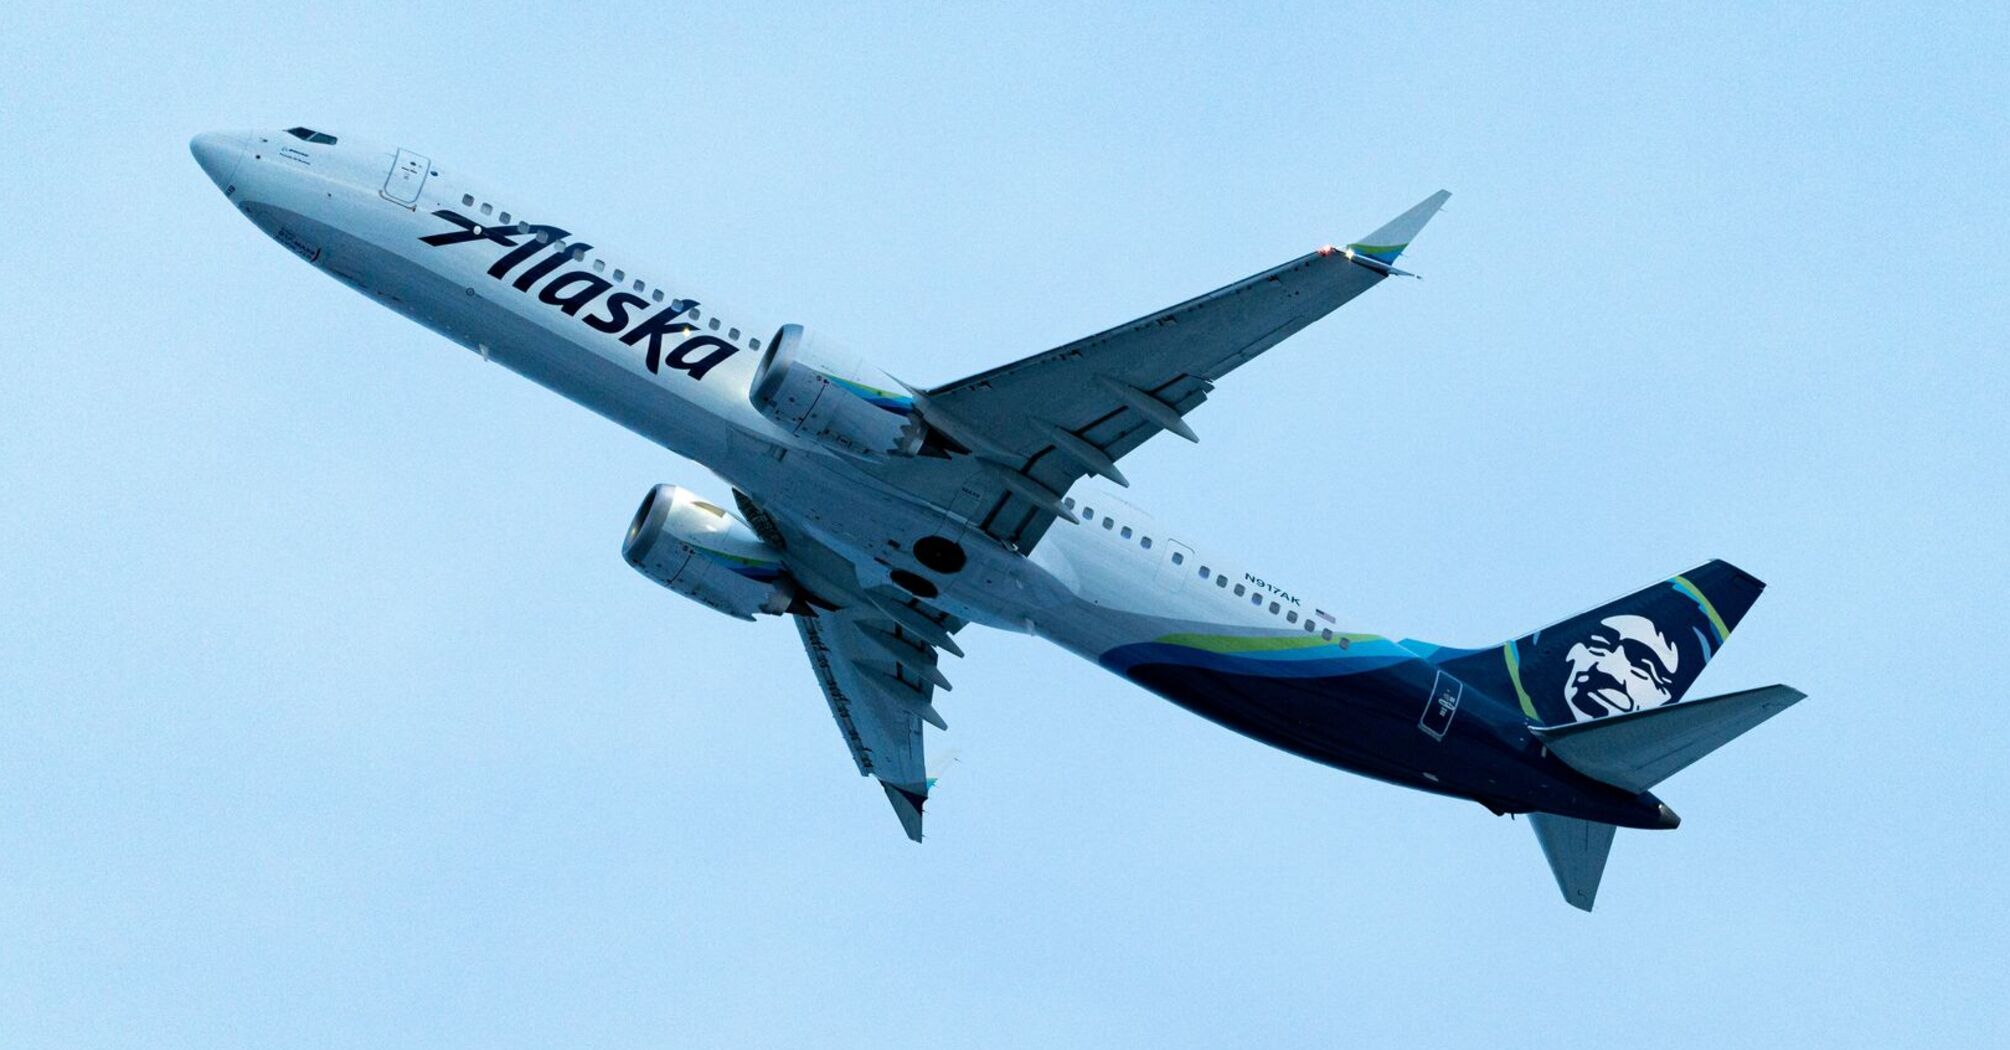 Alaska Airlines accidentally lost a passenger's dog: the pet was reunited with its owner a few days later